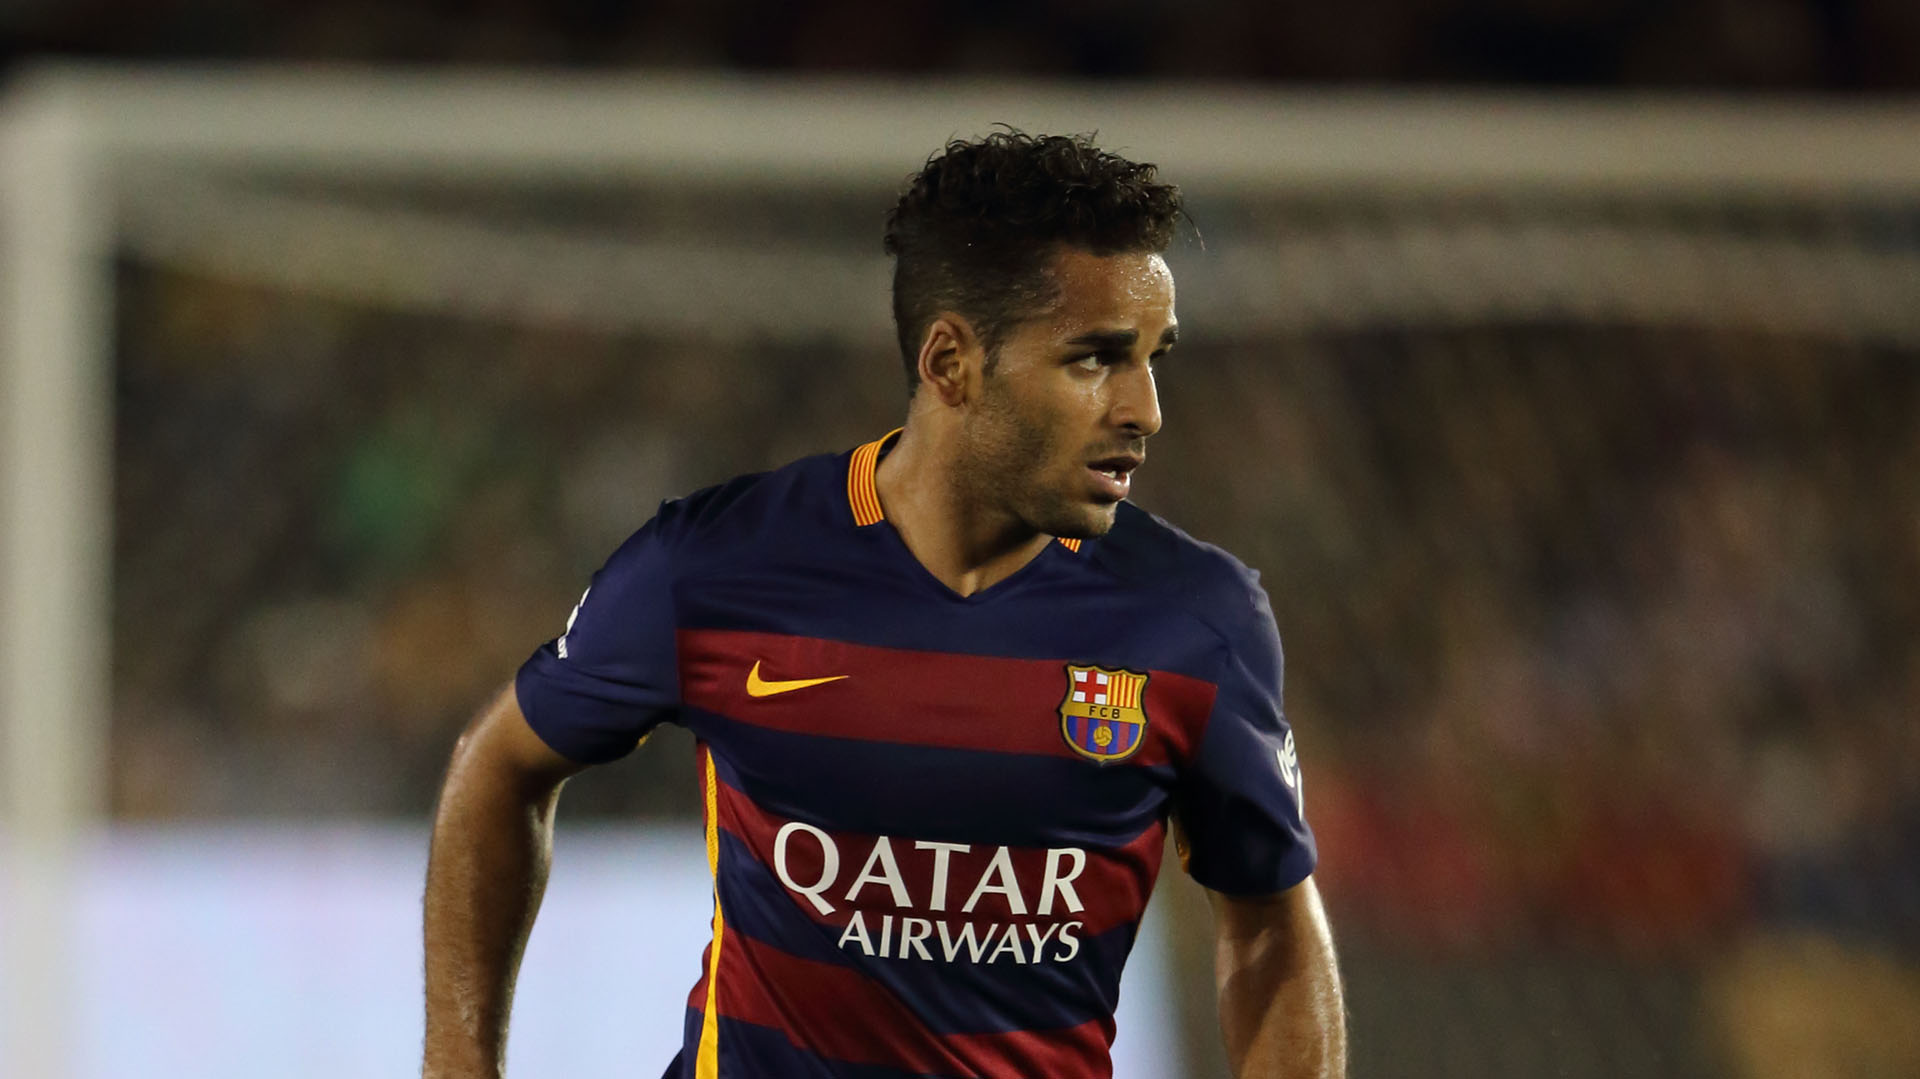 PASADENA, UNITED STATES - JULY 21:  Douglas of FC Barcelona during the International Champions Cup 2015 match between FC Barcelona and Los Angeles Galaxy at Rose Bowl on July 21, 2015 in Pasadena, California.  (Photo by Matthew Ashton - AMA/Getty Images)